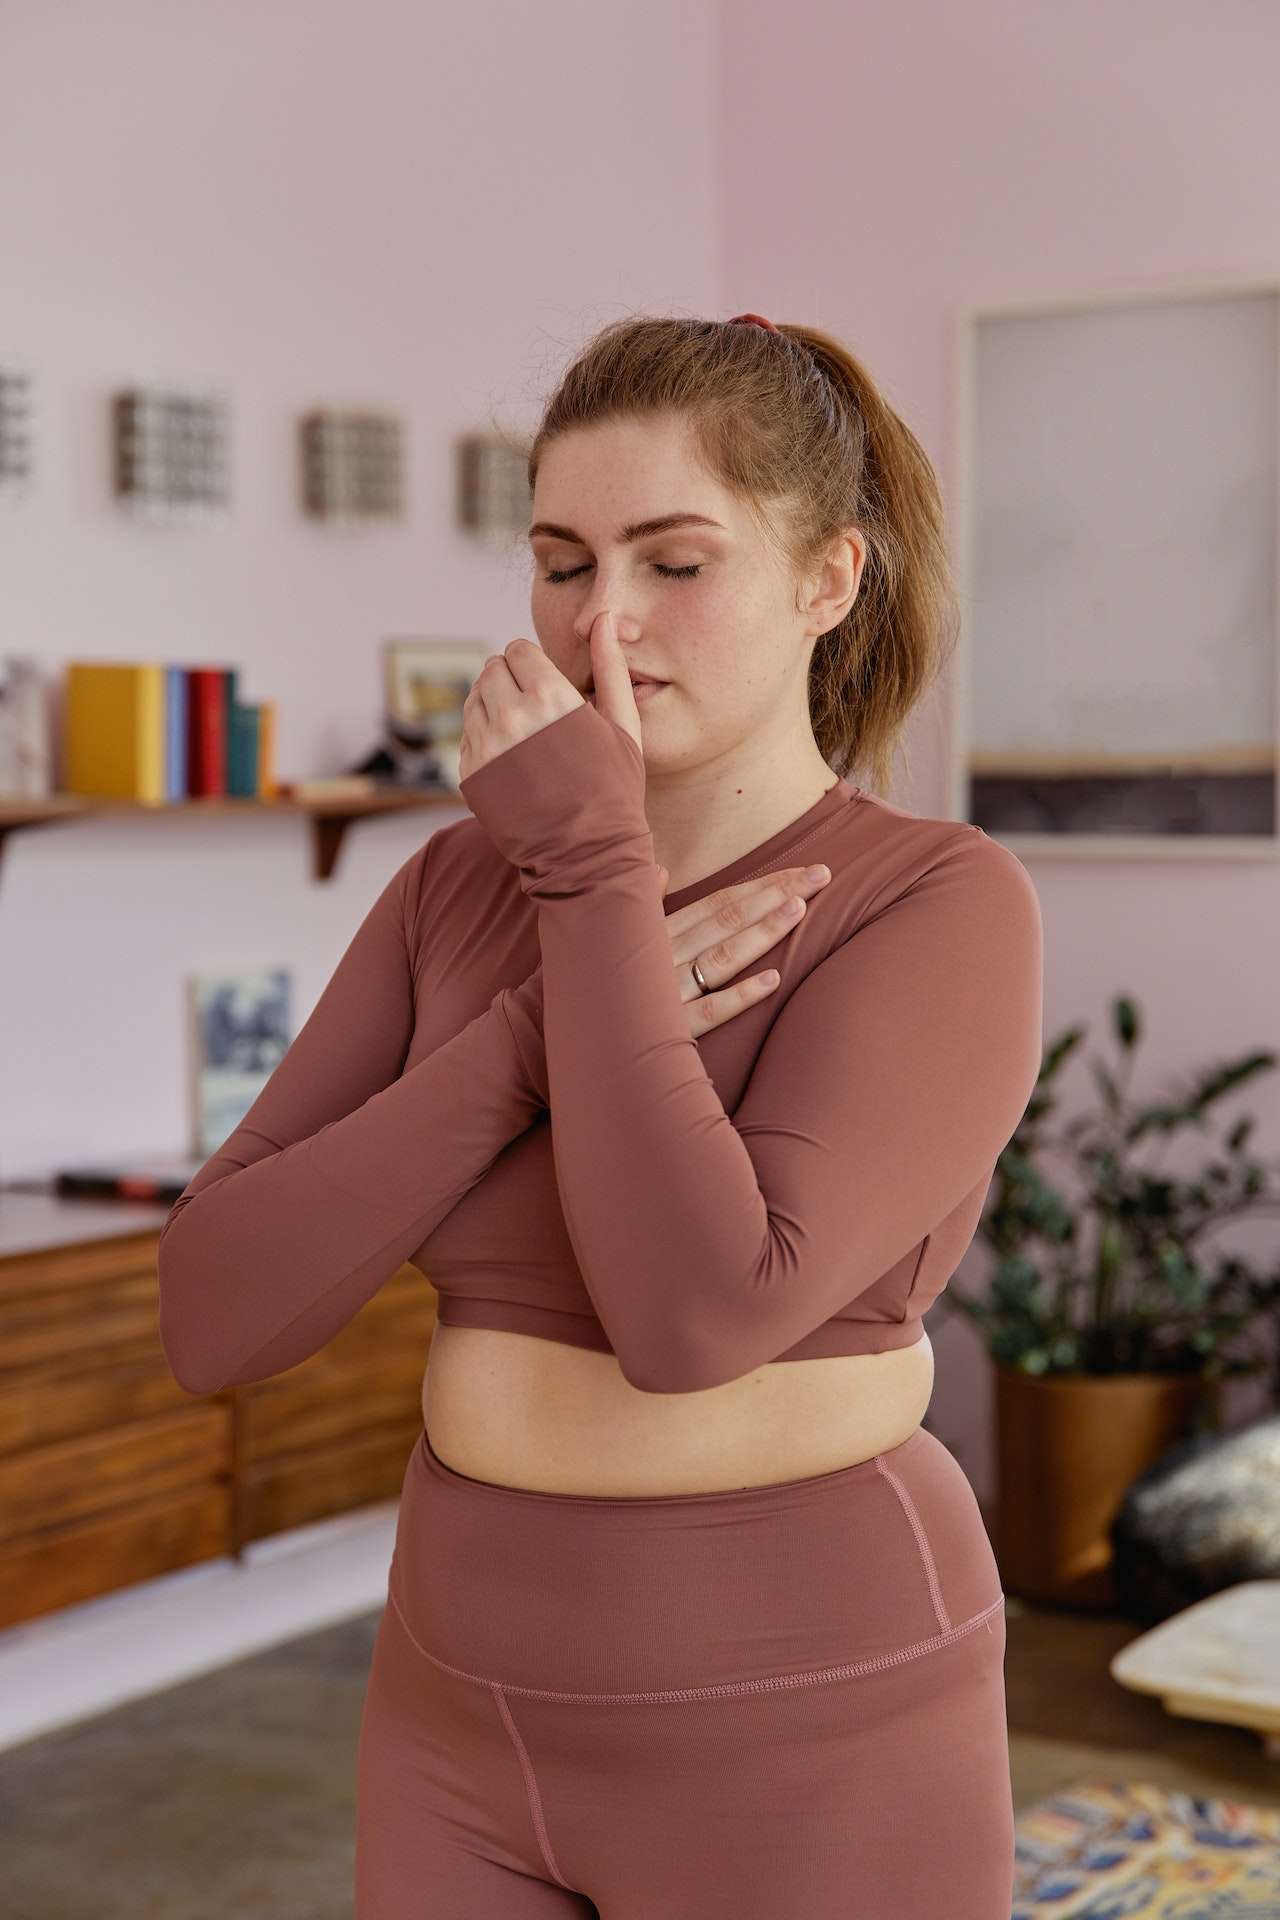 Woman Doing a Breathing Exercise
